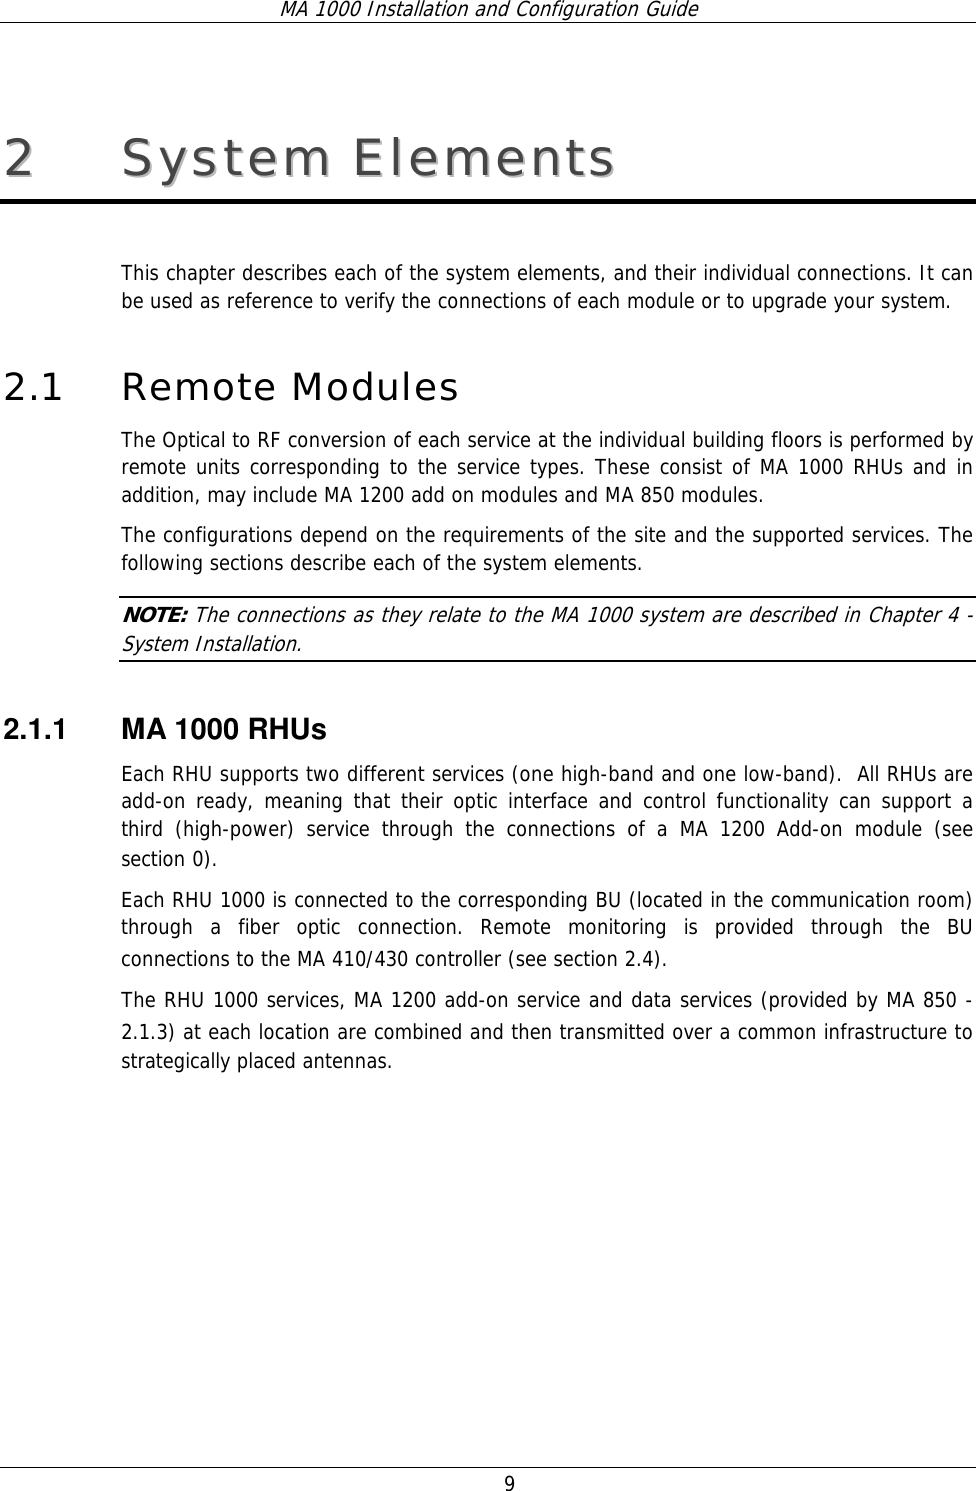 MA 1000 Installation and Configuration Guide  9 22  SSyysstteemm  EElleemmeennttss    This chapter describes each of the system elements, and their individual connections. It can be used as reference to verify the connections of each module or to upgrade your system.  2.1 Remote Modules  The Optical to RF conversion of each service at the individual building floors is performed by remote units corresponding to the service types. These consist of MA 1000 RHUs and in addition, may include MA 1200 add on modules and MA 850 modules.  The configurations depend on the requirements of the site and the supported services. The following sections describe each of the system elements.  NOTE: The connections as they relate to the MA 1000 system are described in Chapter  4 - System Installation. 2.1.1  MA 1000 RHUs  Each RHU supports two different services (one high-band and one low-band).  All RHUs are add-on ready, meaning that their optic interface and control functionality can support a third (high-power) service through the connections of a MA 1200 Add-on module (see section  0).  Each RHU 1000 is connected to the corresponding BU (located in the communication room) through a fiber optic connection. Remote monitoring is provided through the BU connections to the MA 410/430 controller (see section  2.4).   The RHU 1000 services, MA 1200 add-on service and data services (provided by MA 850 -  2.1.3) at each location are combined and then transmitted over a common infrastructure to strategically placed antennas.   